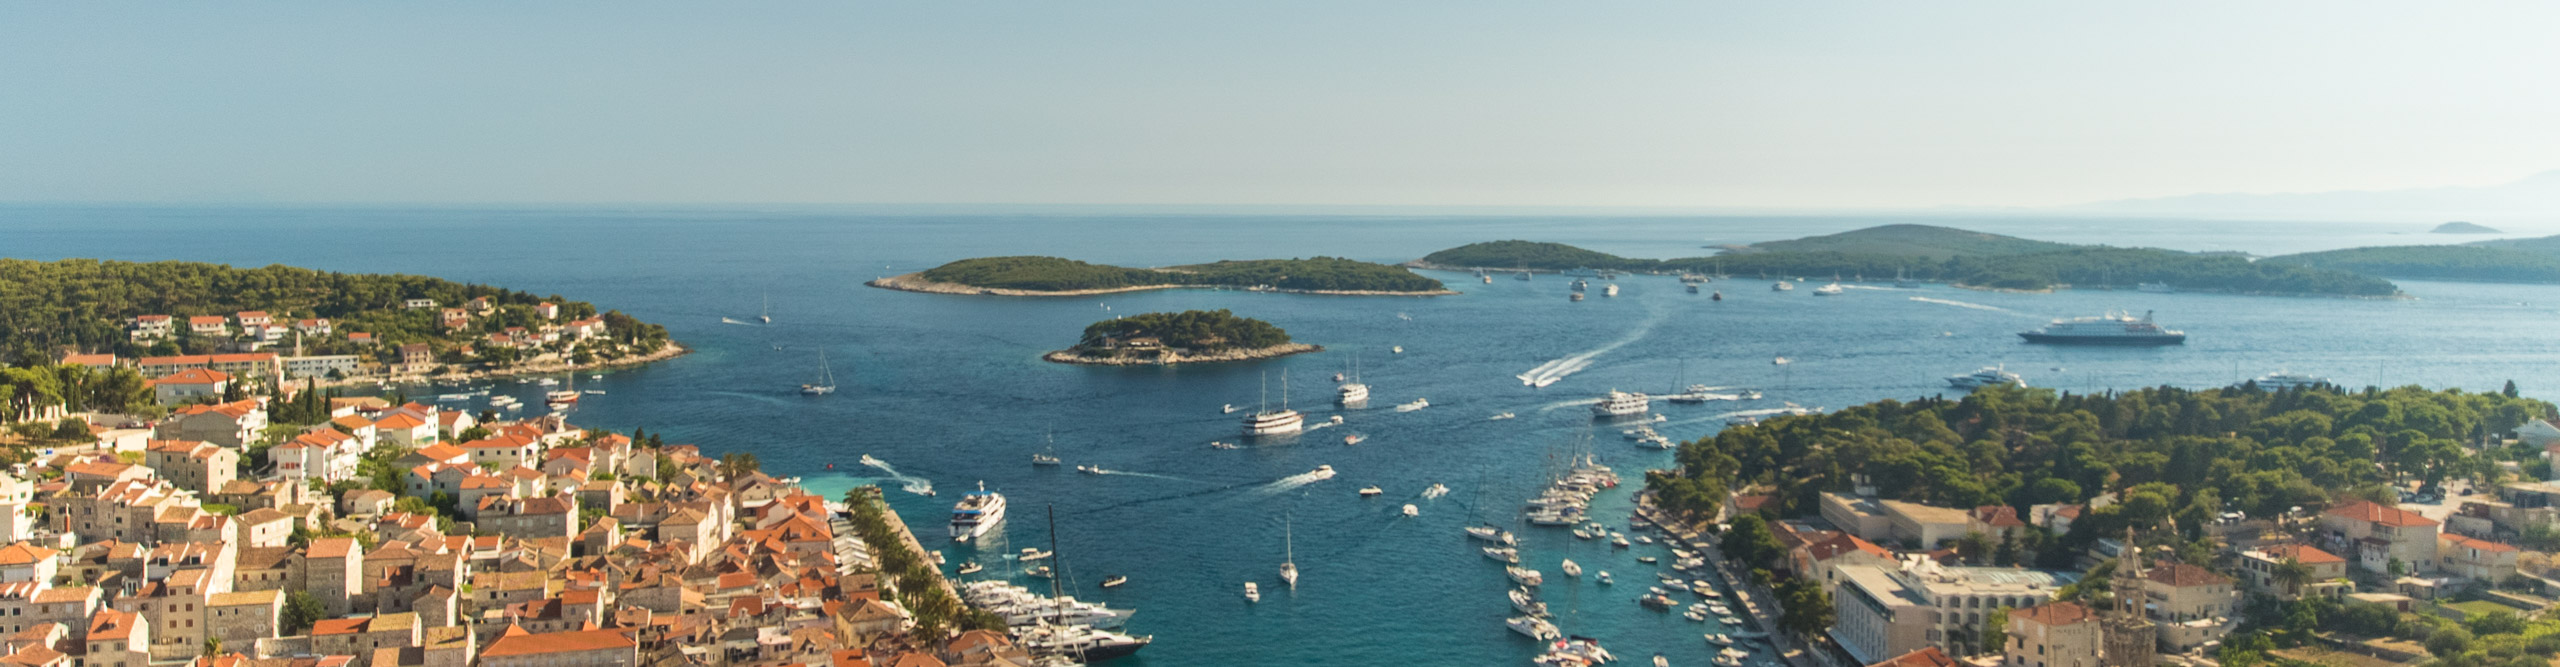 View of coastline and boats on a clear sunny day in Croatia 